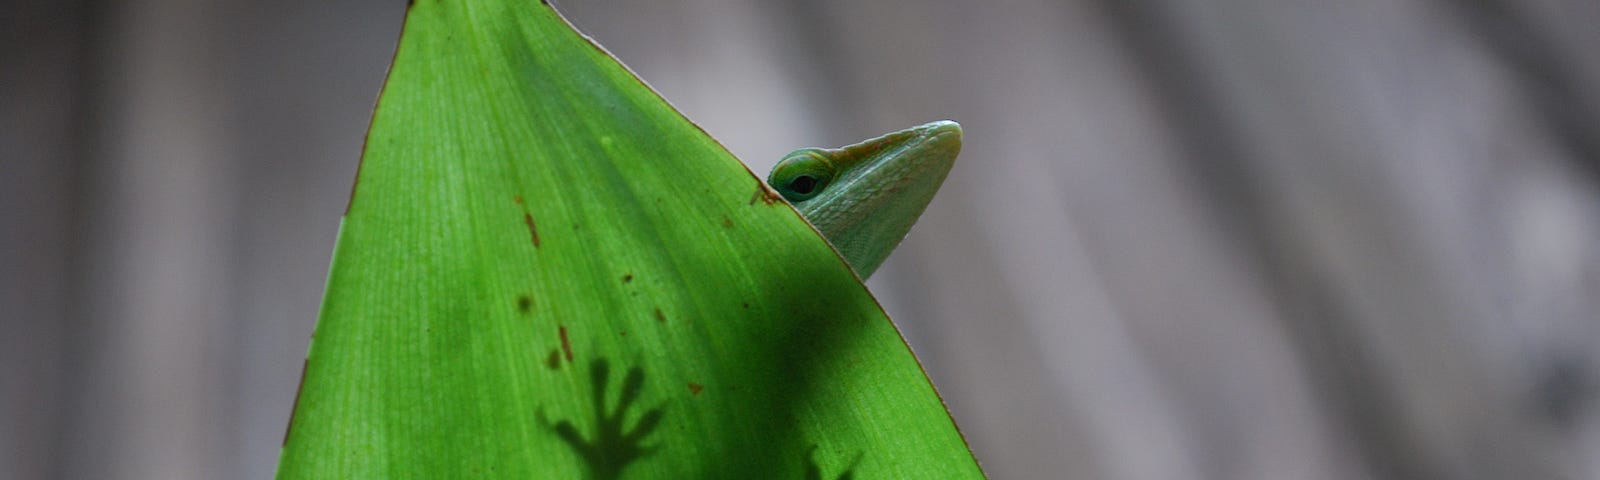 Photo of a Green anole lizard on a large green leaf